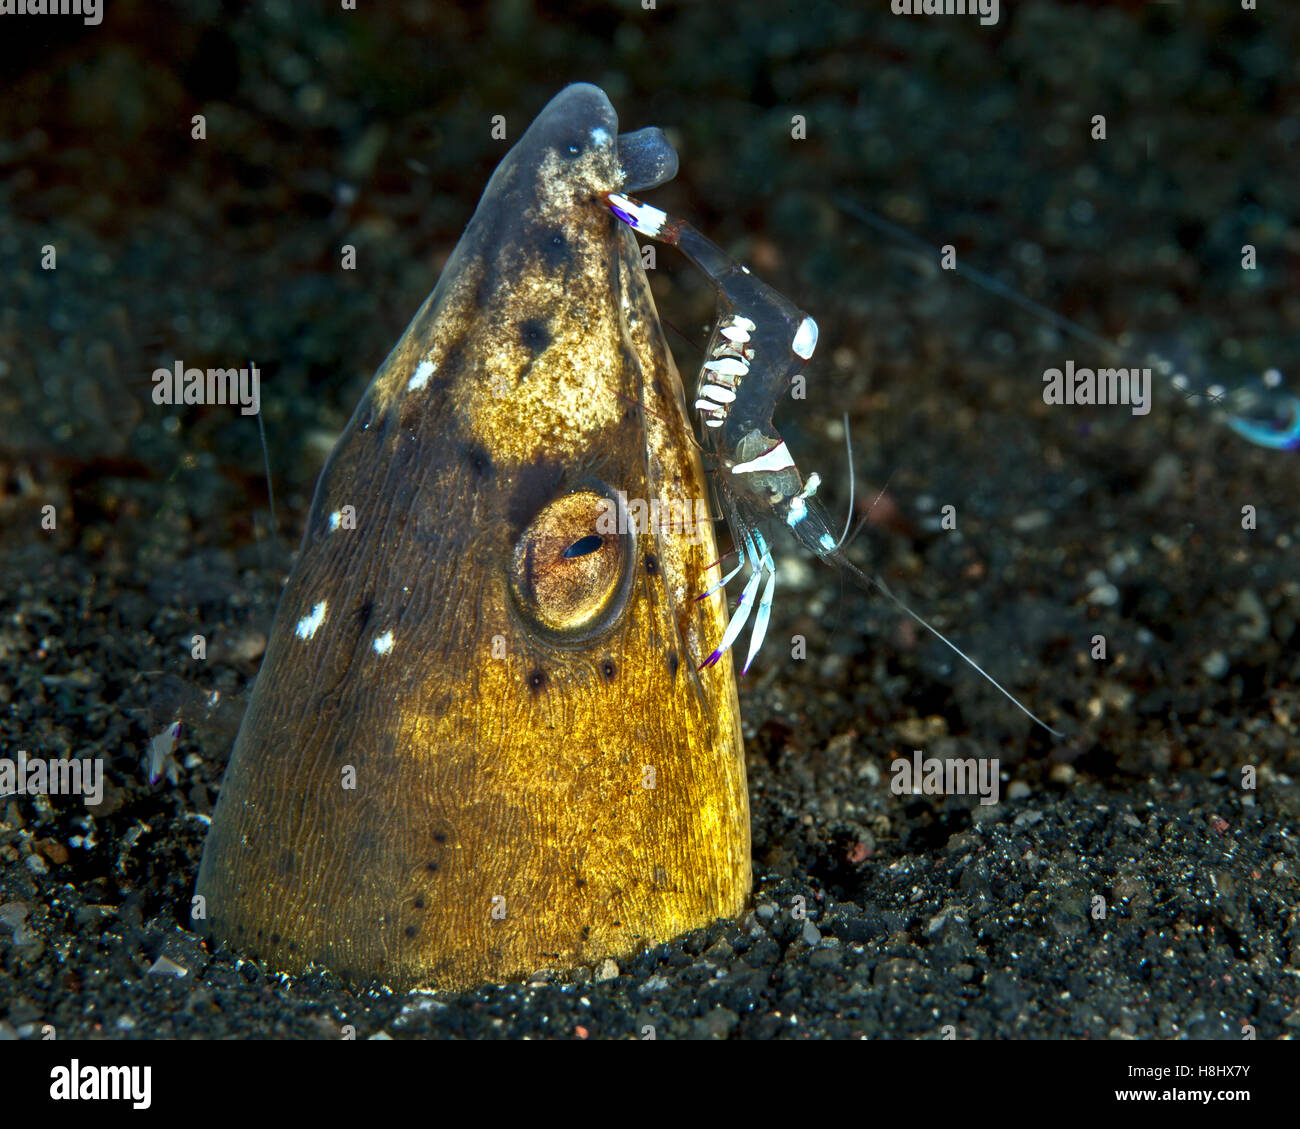 Close-up image showing Commensal shrimp cleaning the head of a Black finned eel. Stock Photo